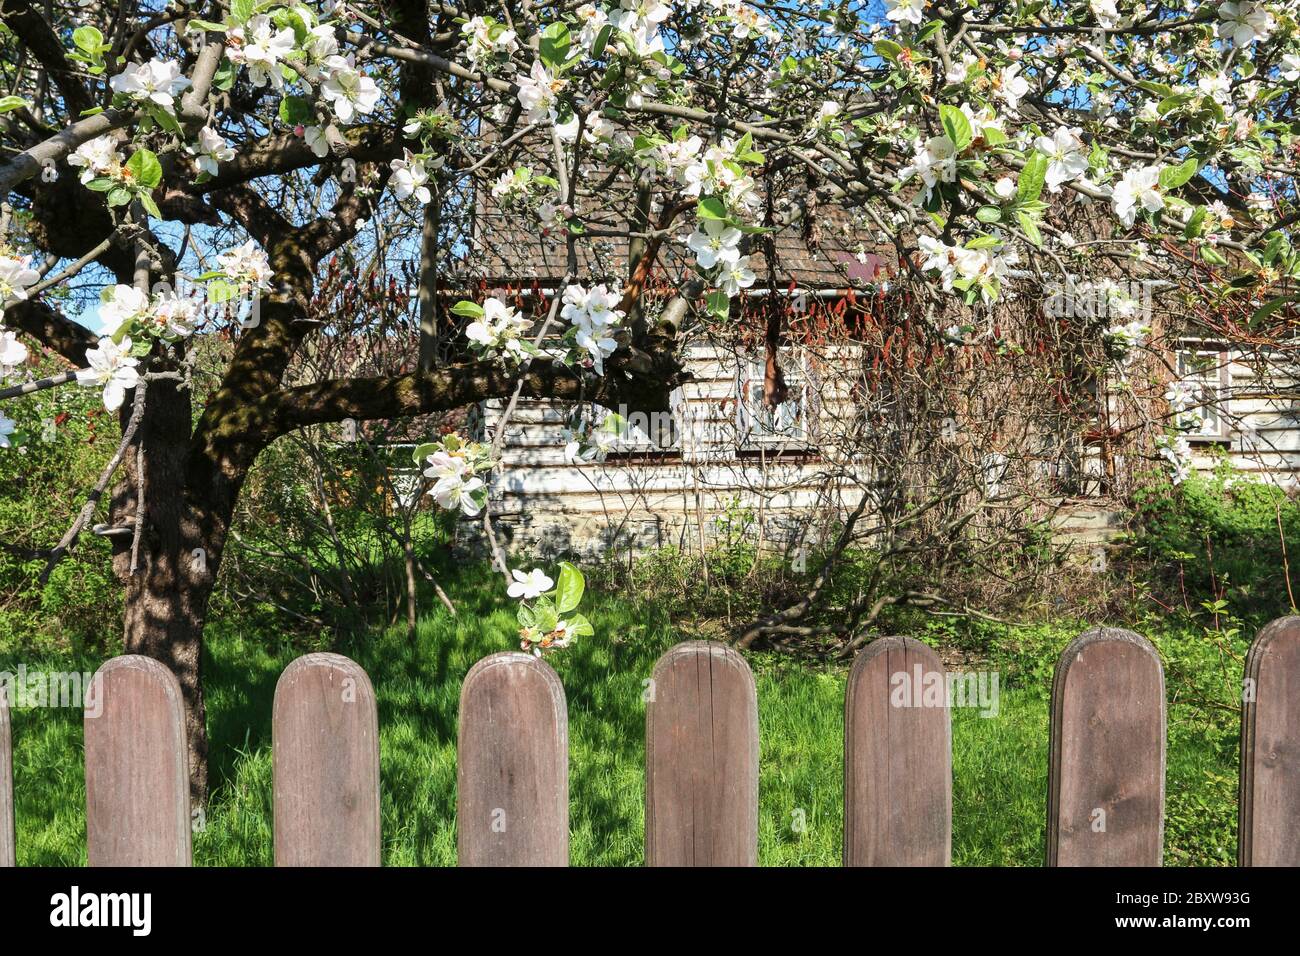 Wooden fence in front of old hut. Beautiful apple trees in the garden. Rustic, natural scenery. Stock Photo